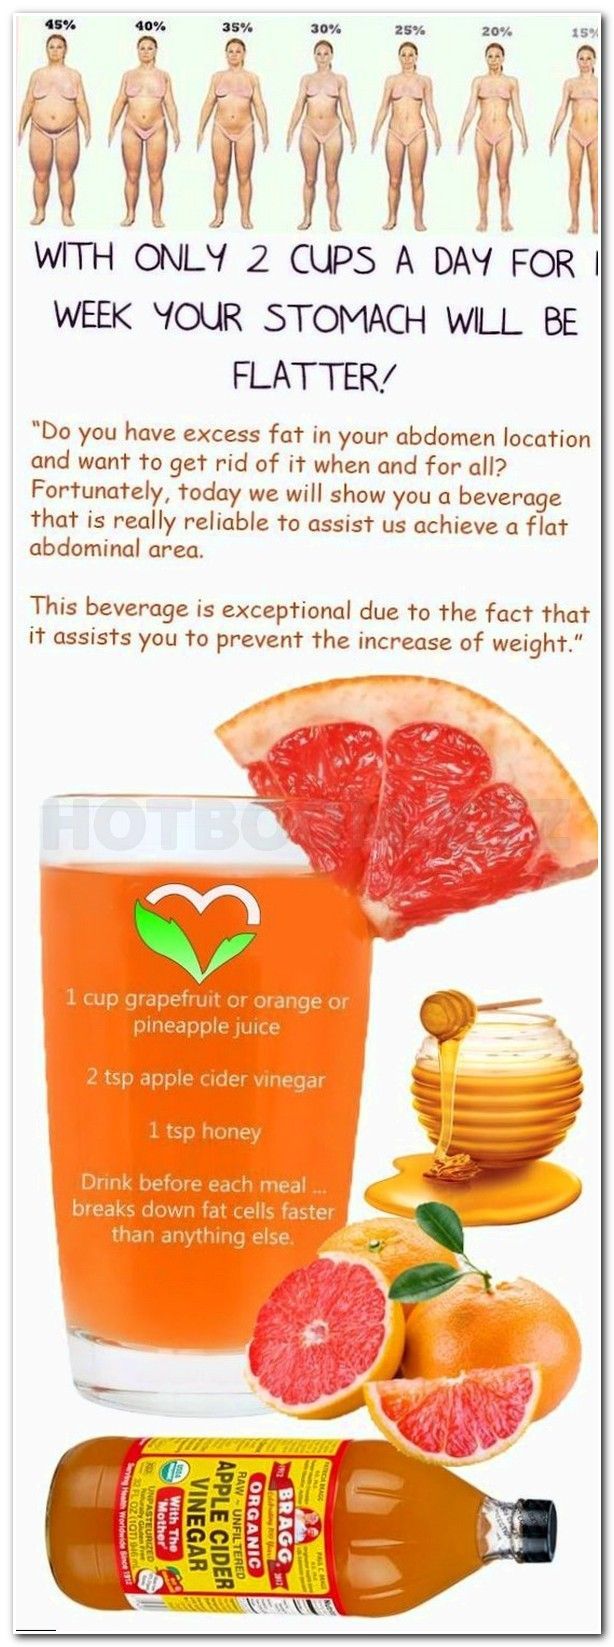 apple cider vinegar benefits for weight loss, low fat high fiber diet, menu diet mayo, basic exercise to reduce weight, fruits